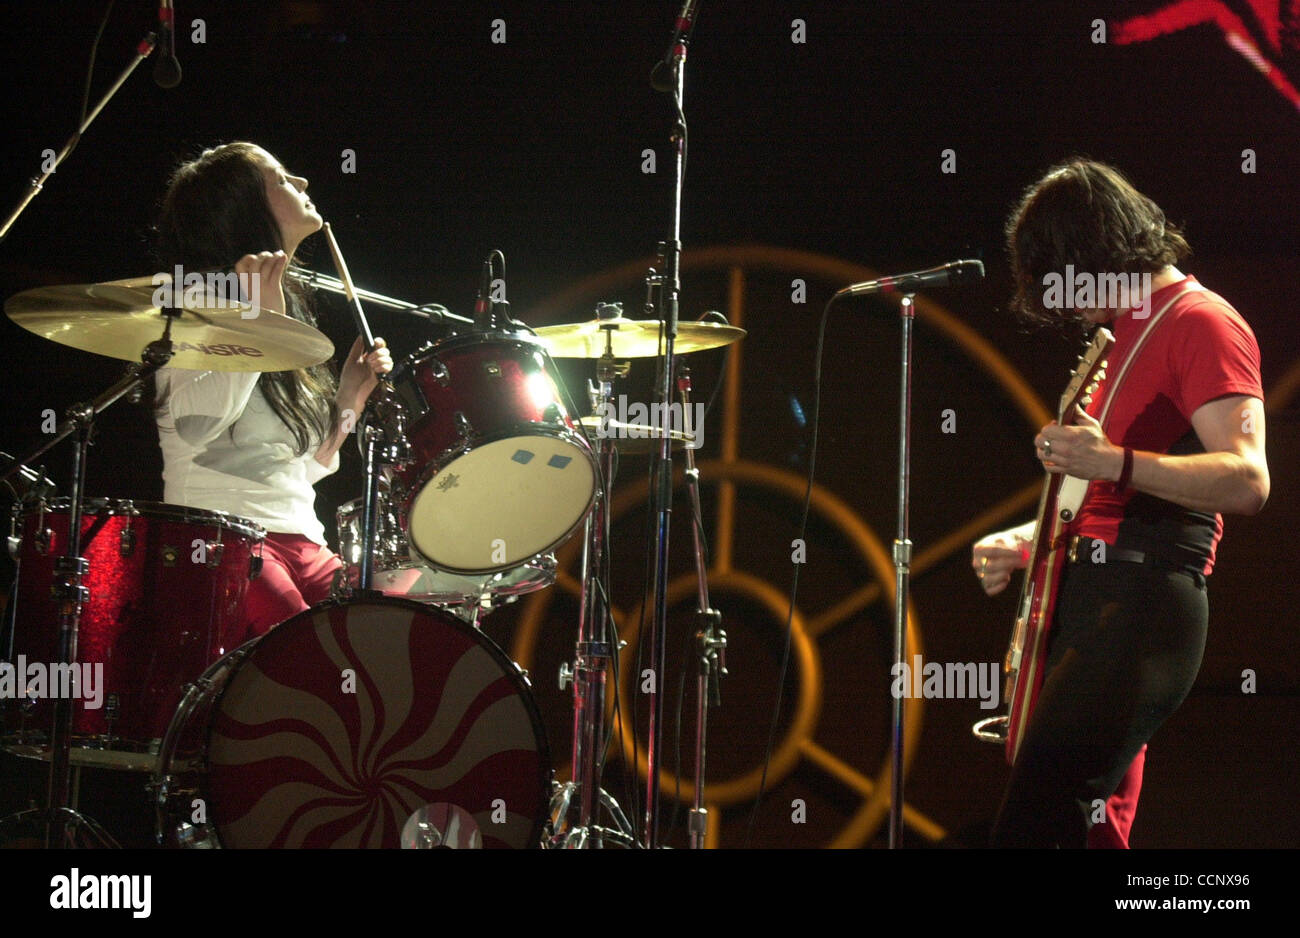 Jun 14, 2003; Irvine, CA, USA; Siblings JACK (vocals, guitar) and MEG WHITE (drums, vocals) of 'The White Stripes' at the KROQ Weenie Roast 2003 held at Verison Wireless Amphitheater. Stock Photo